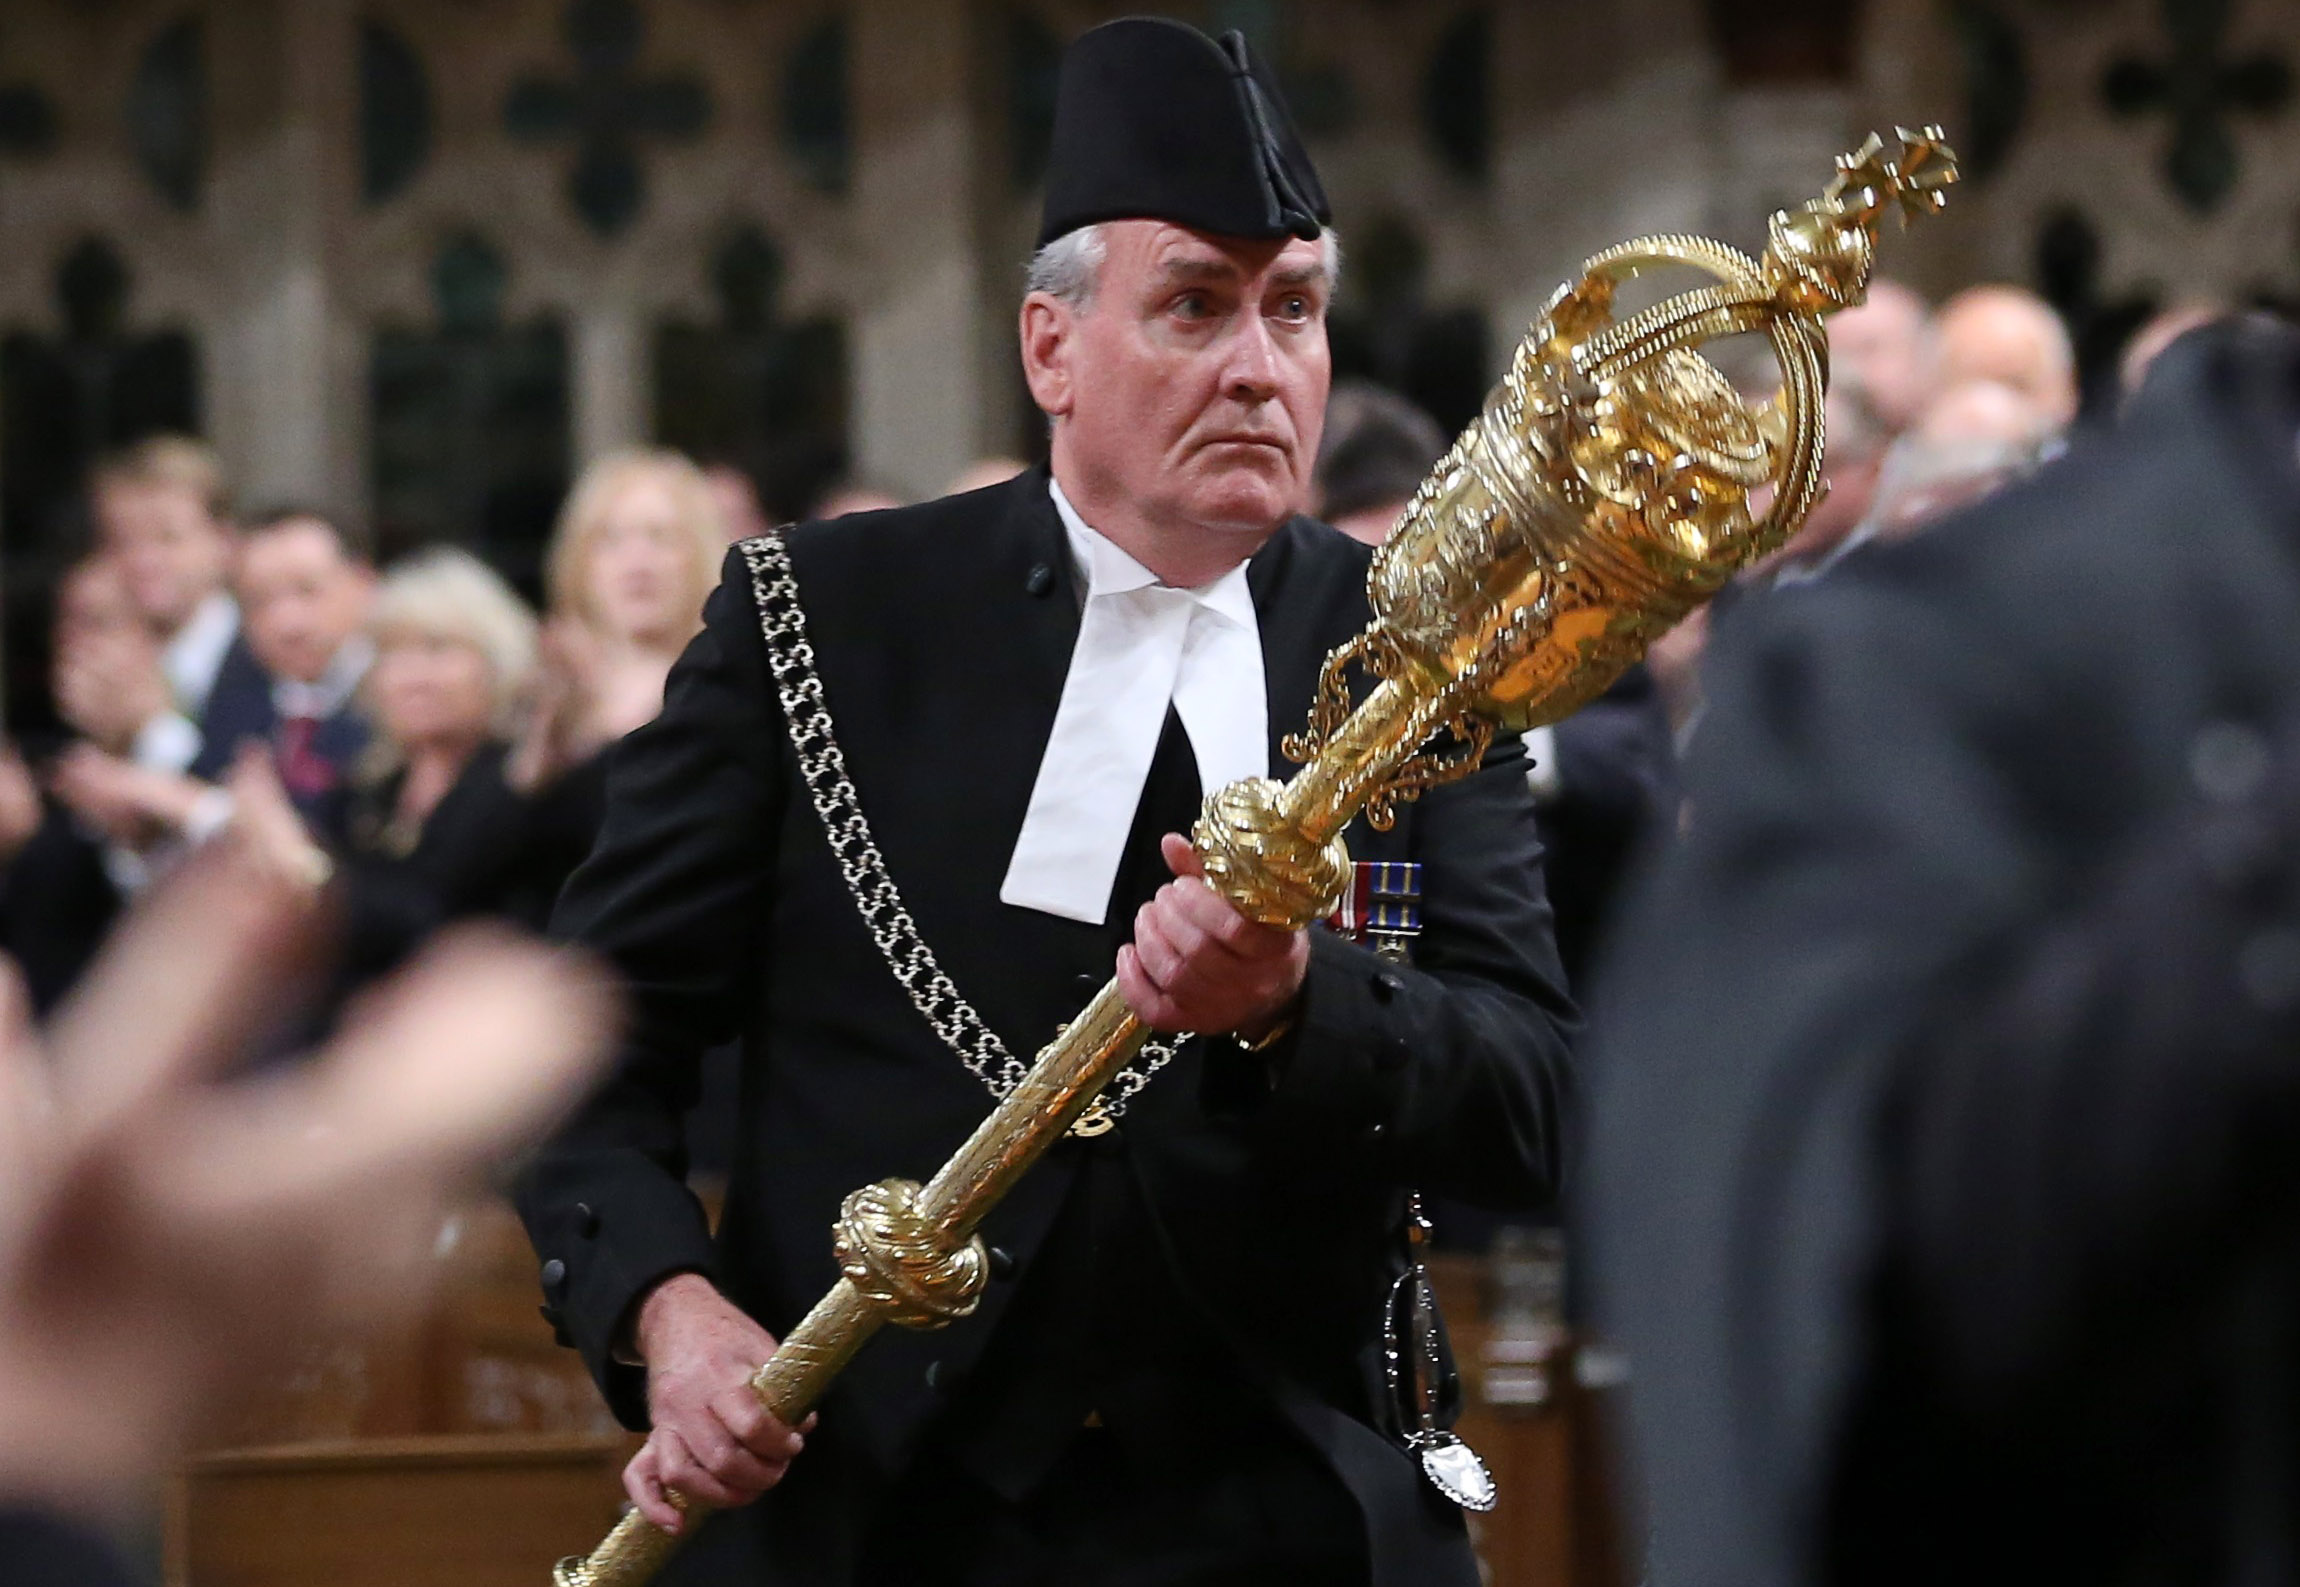 Sergeant-at-Arms Kevin Vickers is applauded in the House of Commons in Ottawa October 23, 2014. (Chris Wattie&amp;mdash;Reuters)